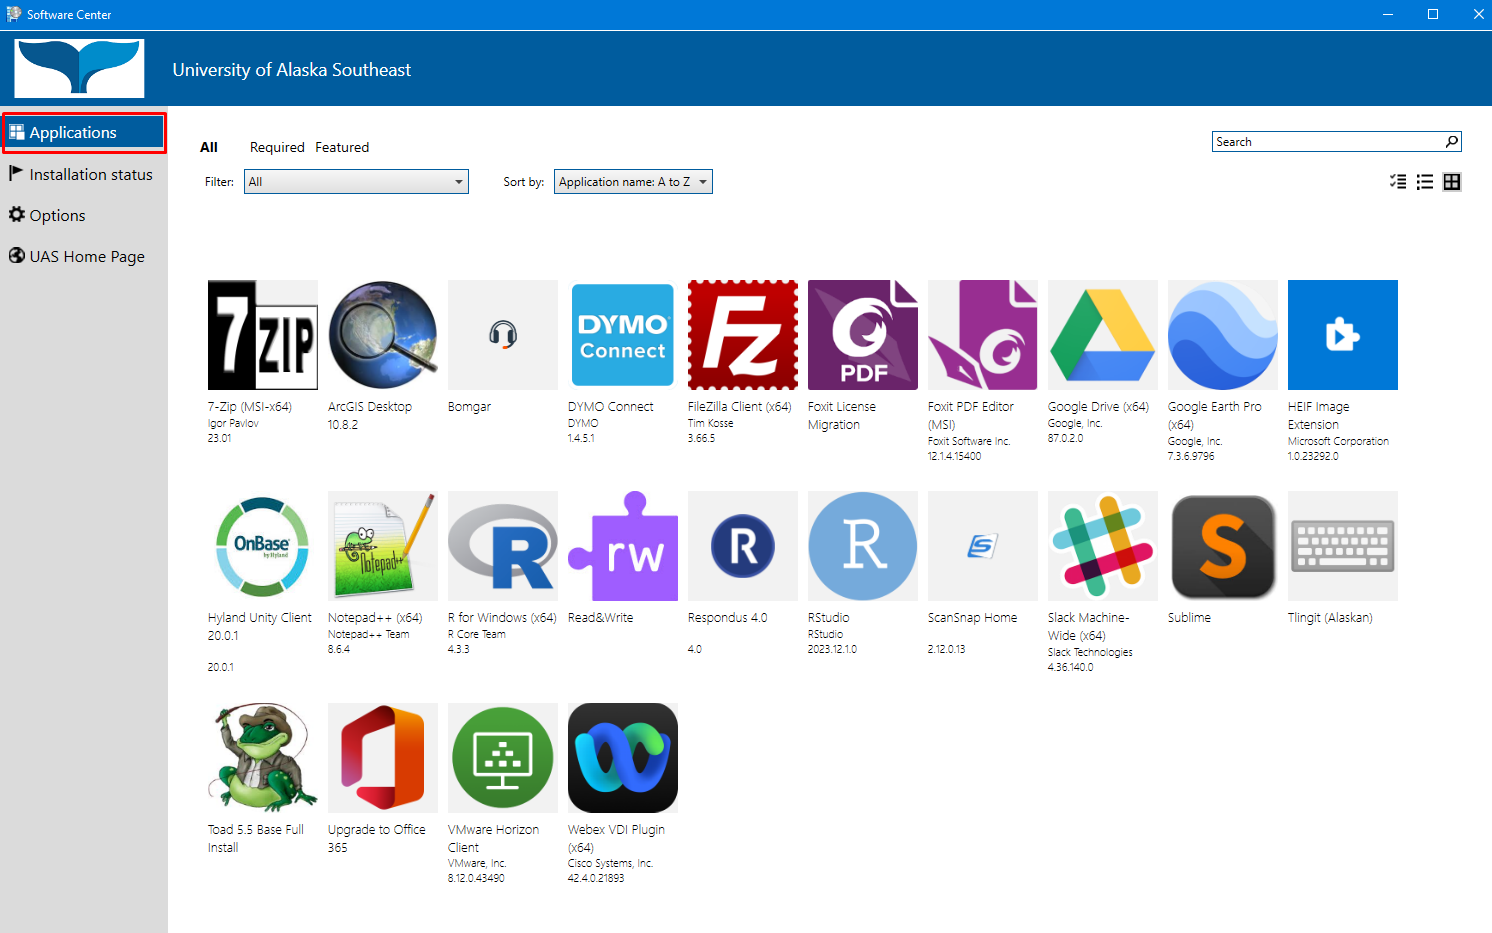 Review the software available to you from the Software Center Applications menu.